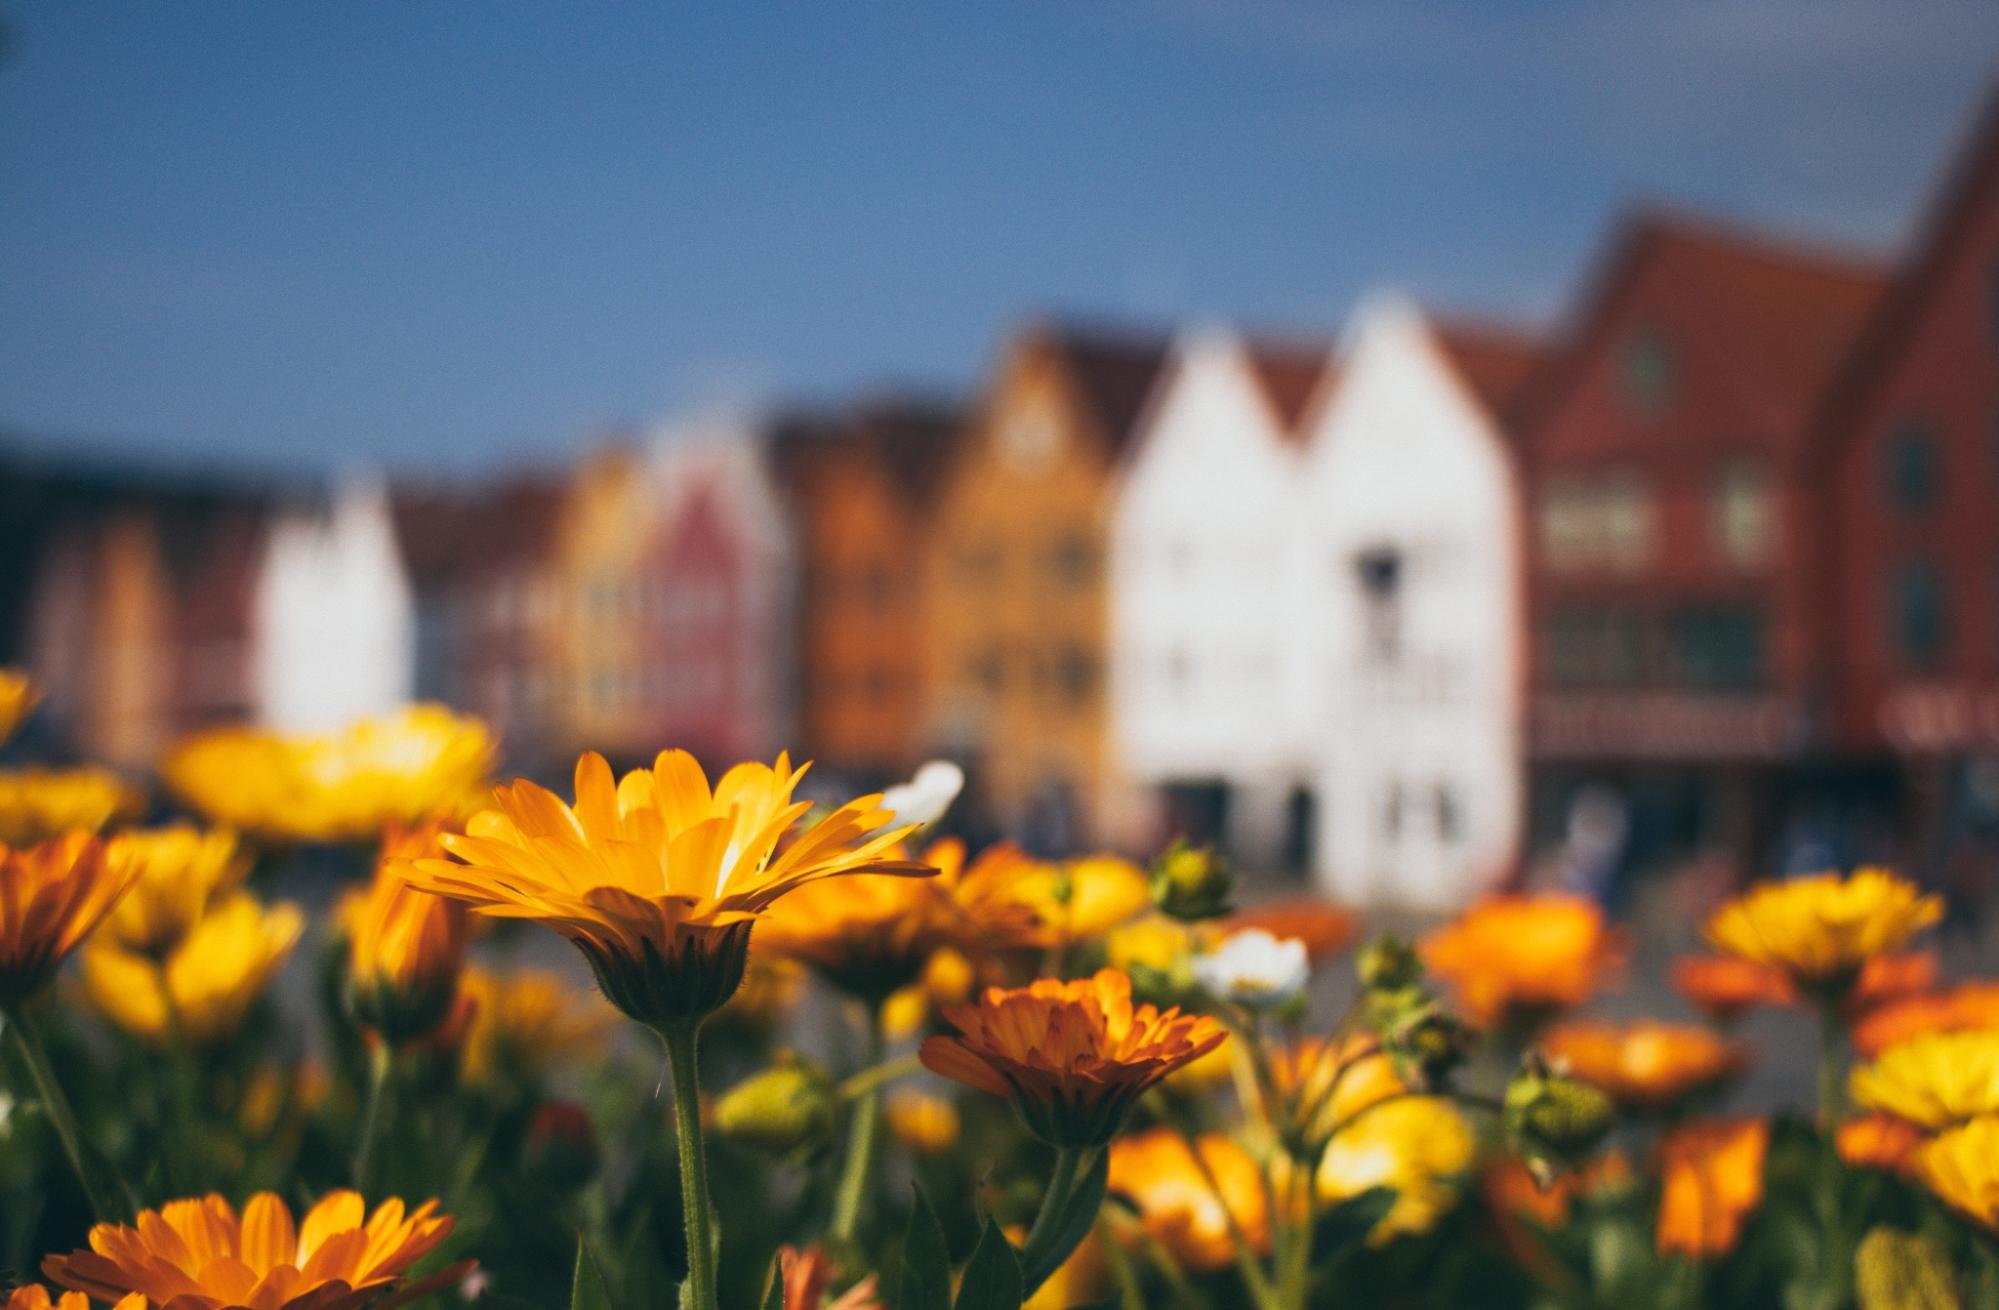 calendula flowers with buildings in the background